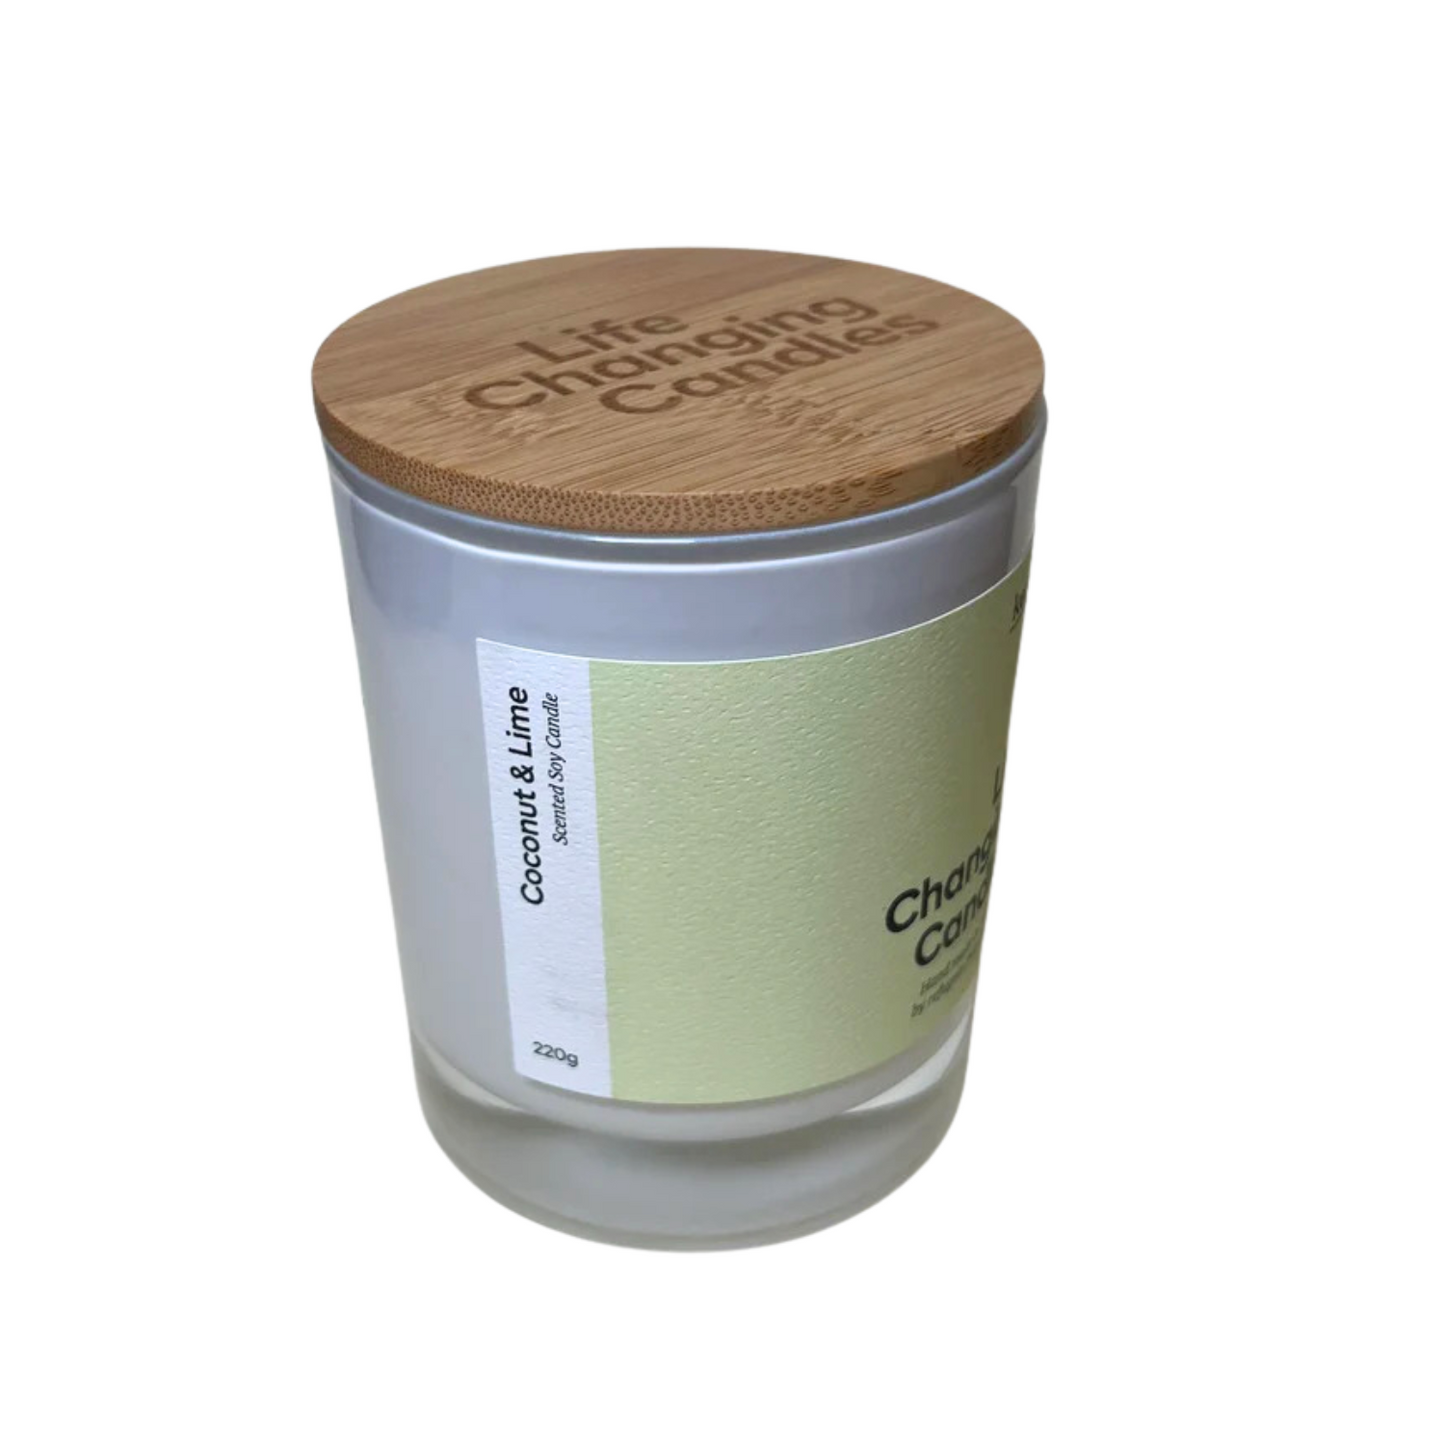 Medium size candle 220g for Dougies